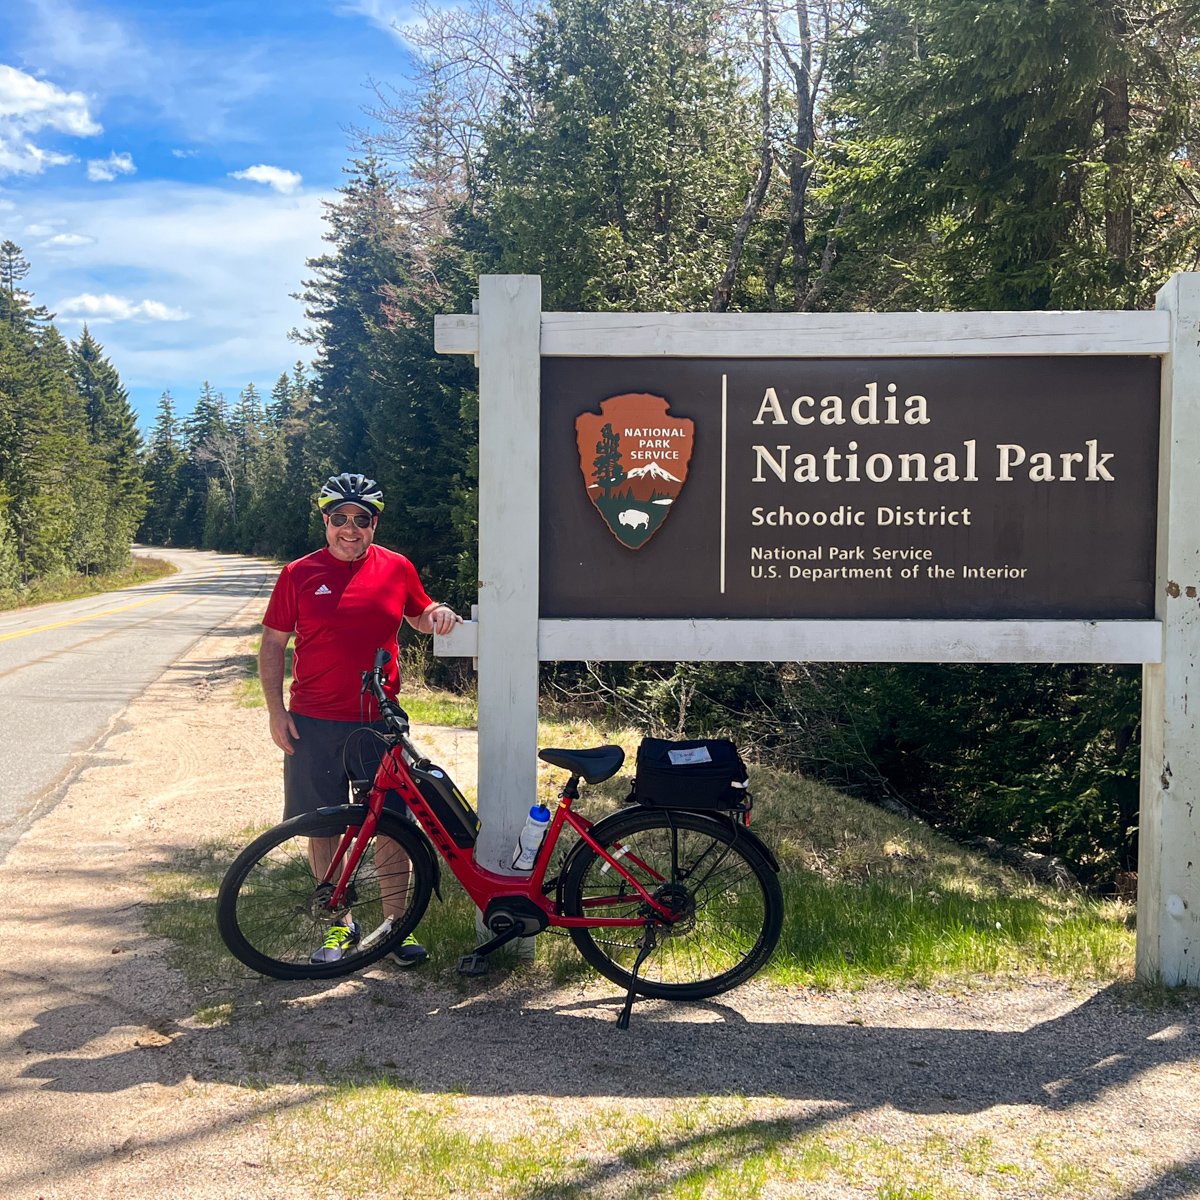 Dave with a Trek e-bike at the entrance sign to the Schoodic District in Acadia National Park, Maine